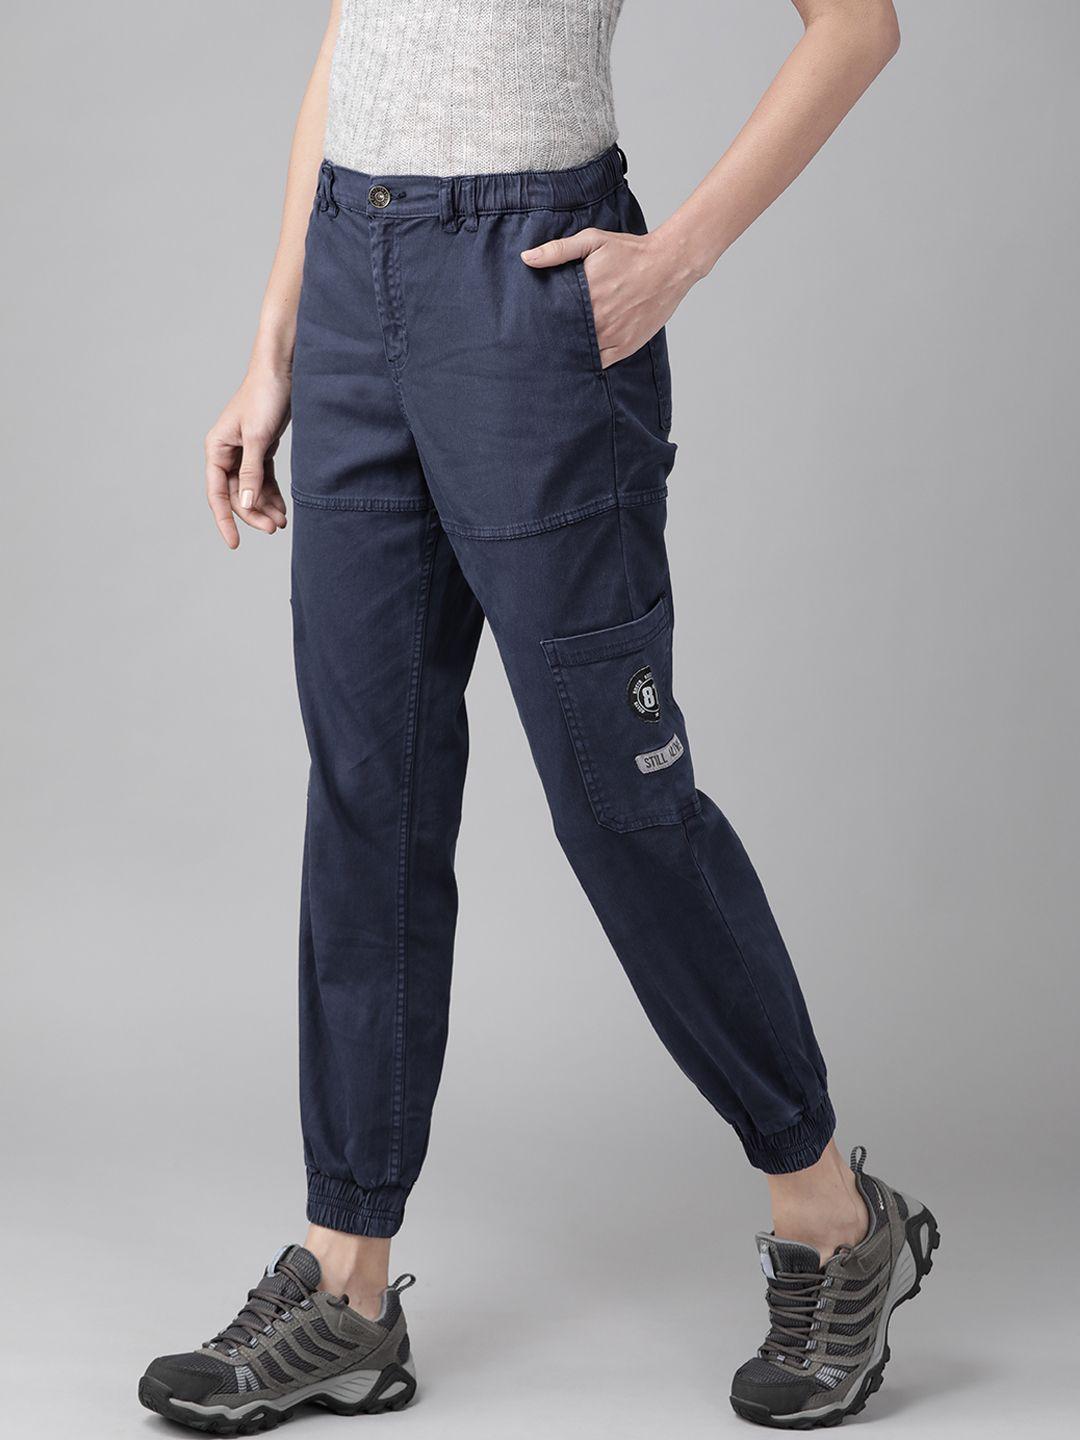 the roadster lifestyle co women navy blue solid cargo joggers